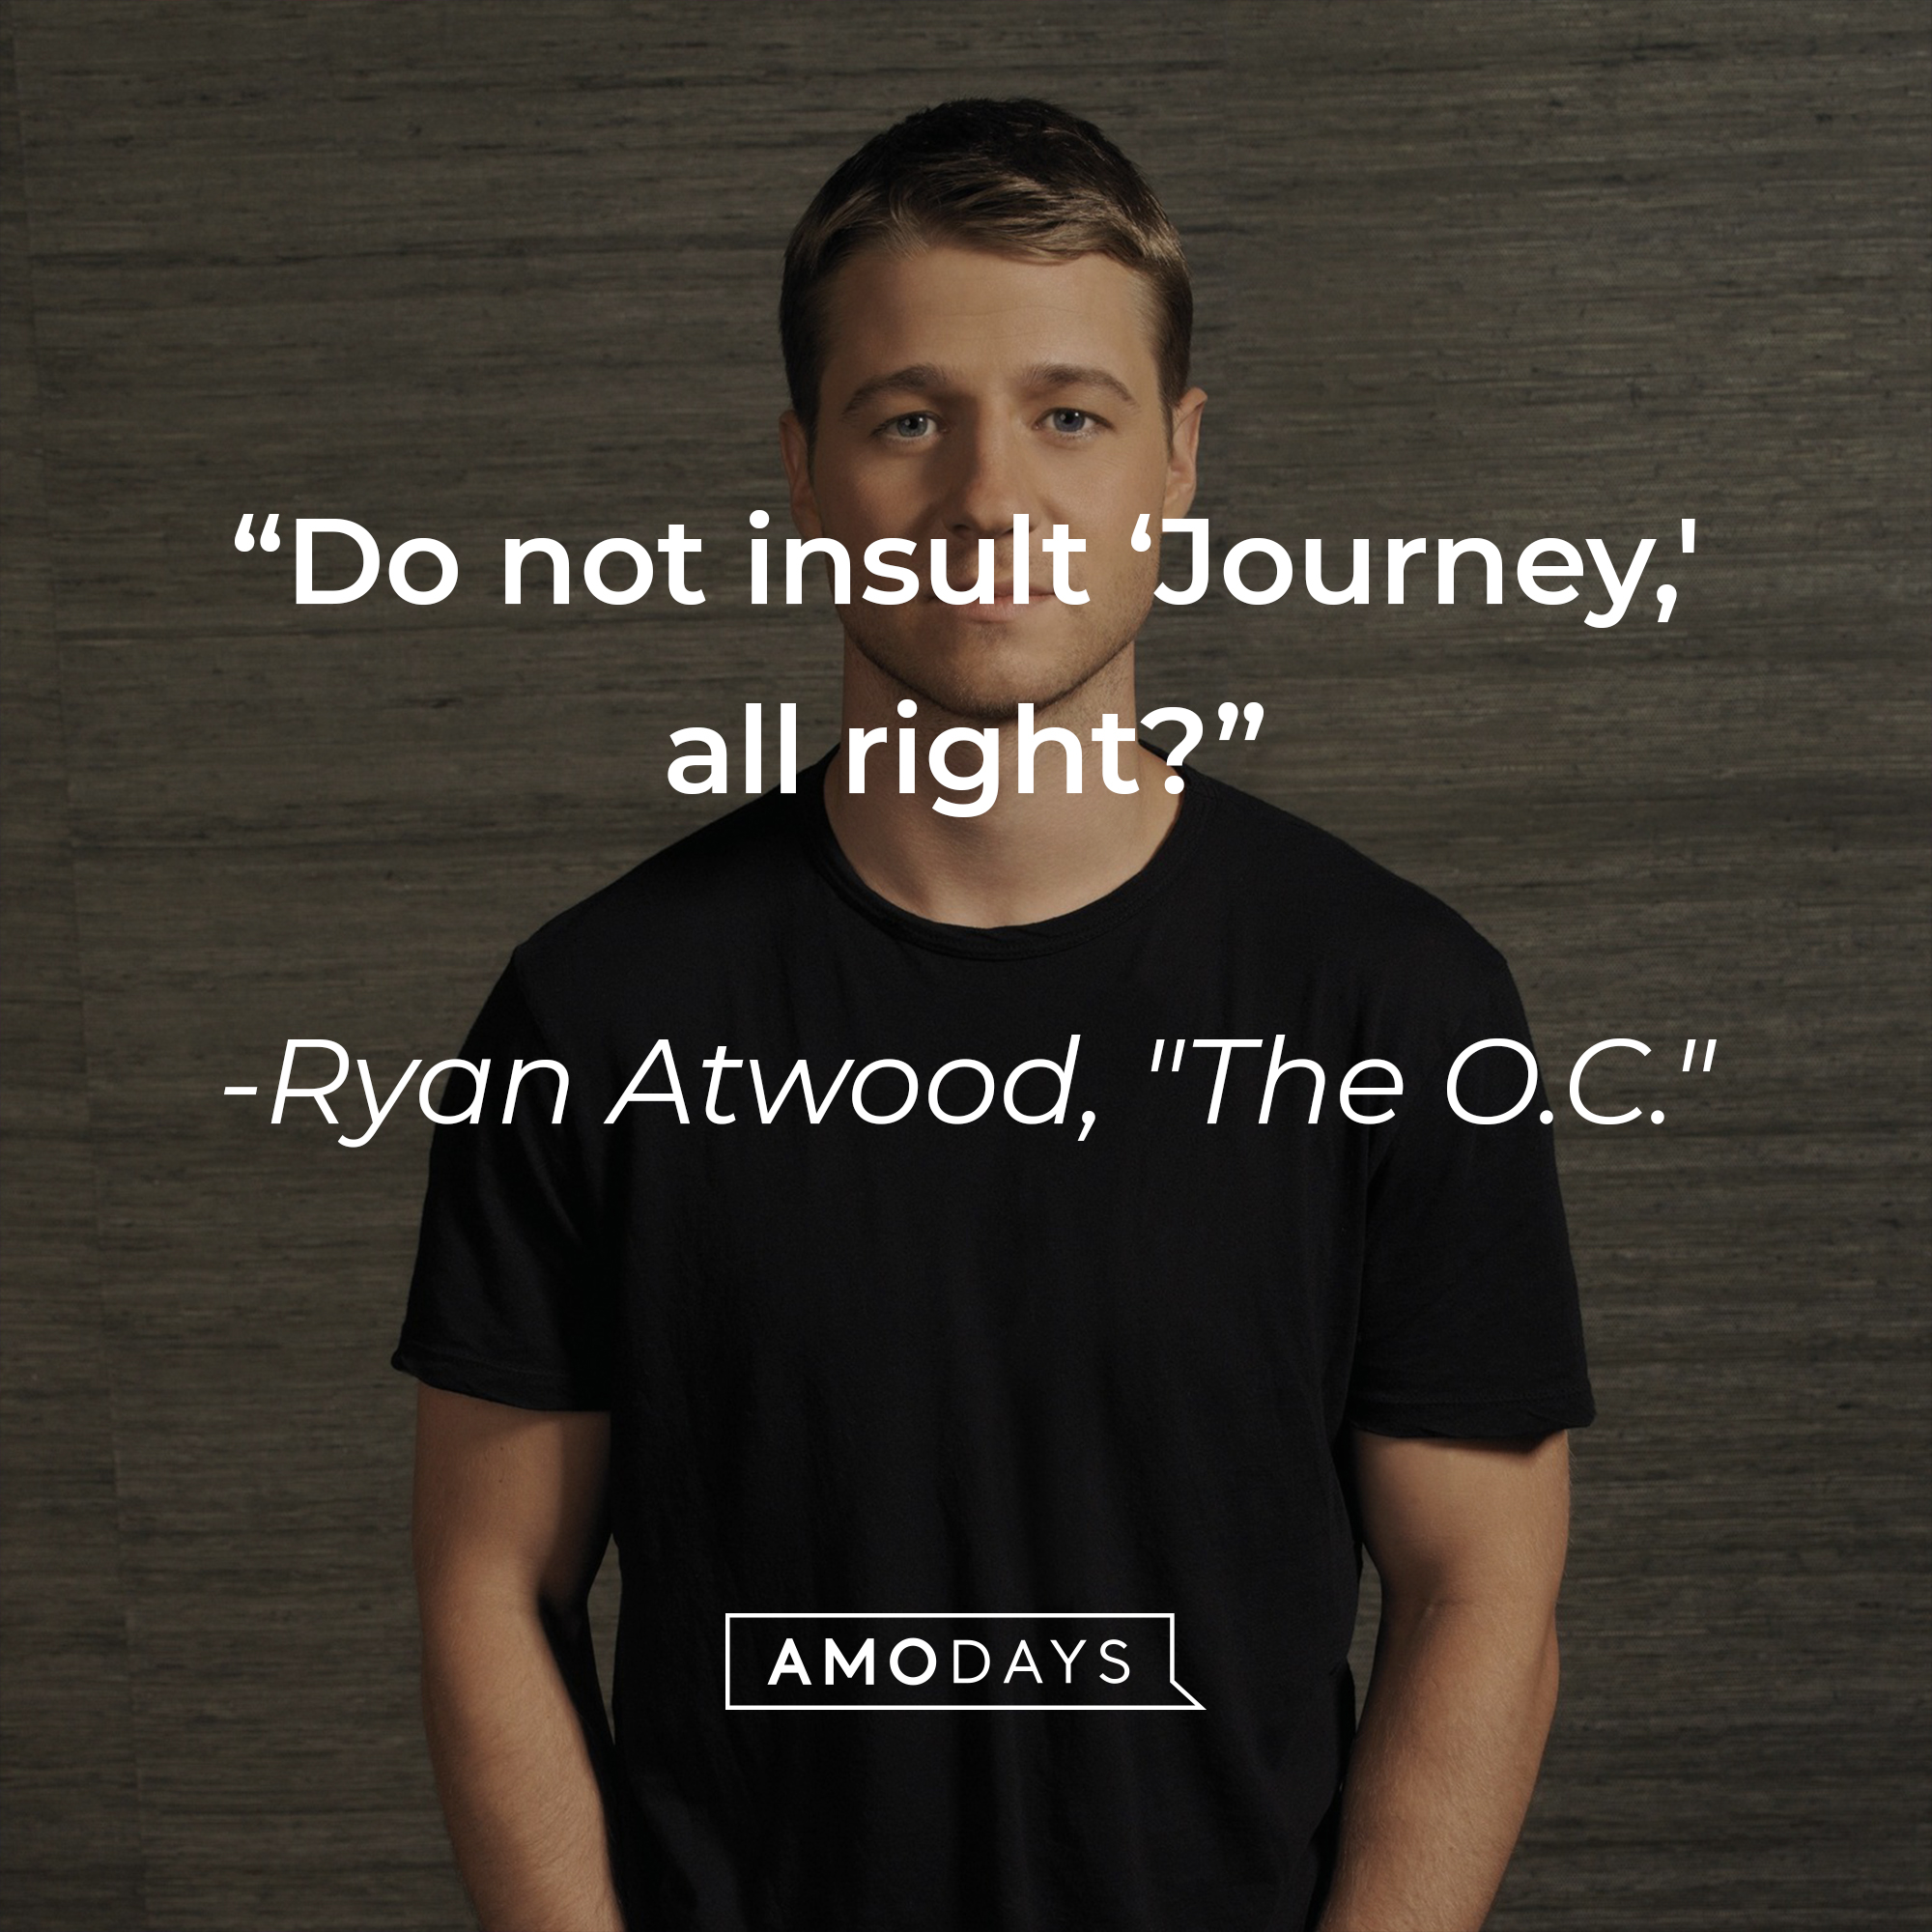 Ryan Atwood's quote: "Do not insult ‘Journey,' all right?" | Source: Facebook.com/TheOC